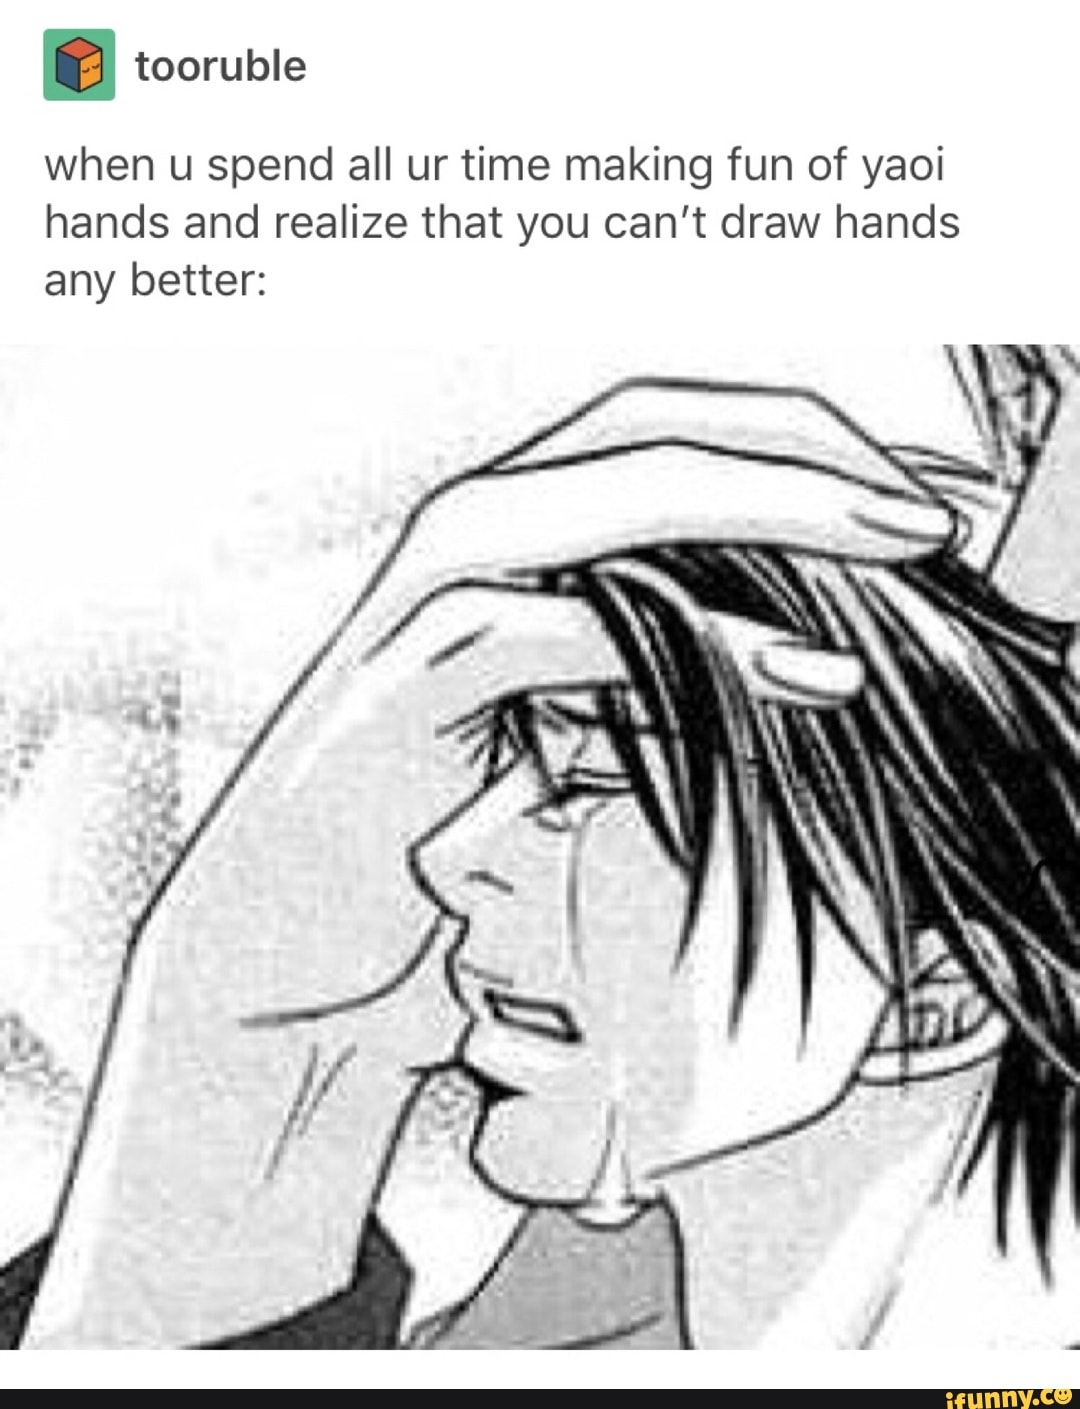 & tooruble When u spend all ur time making fun of yaoi hands and realiz...